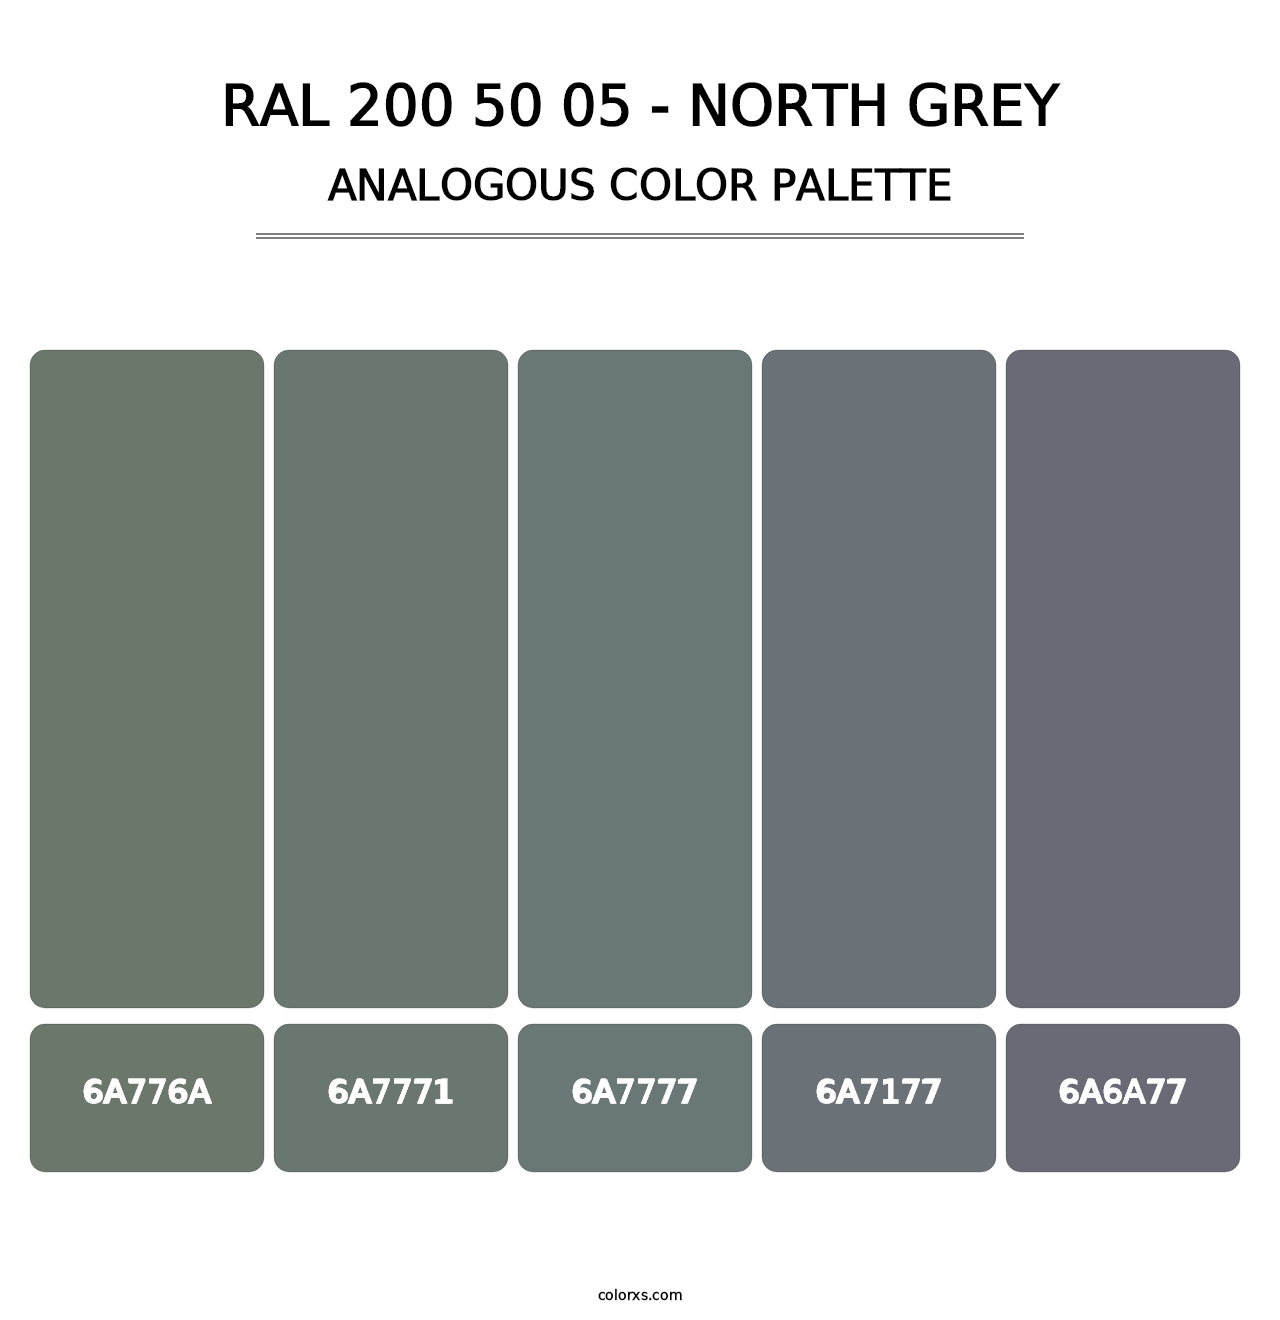 RAL 200 50 05 - North Grey - Analogous Color Palette